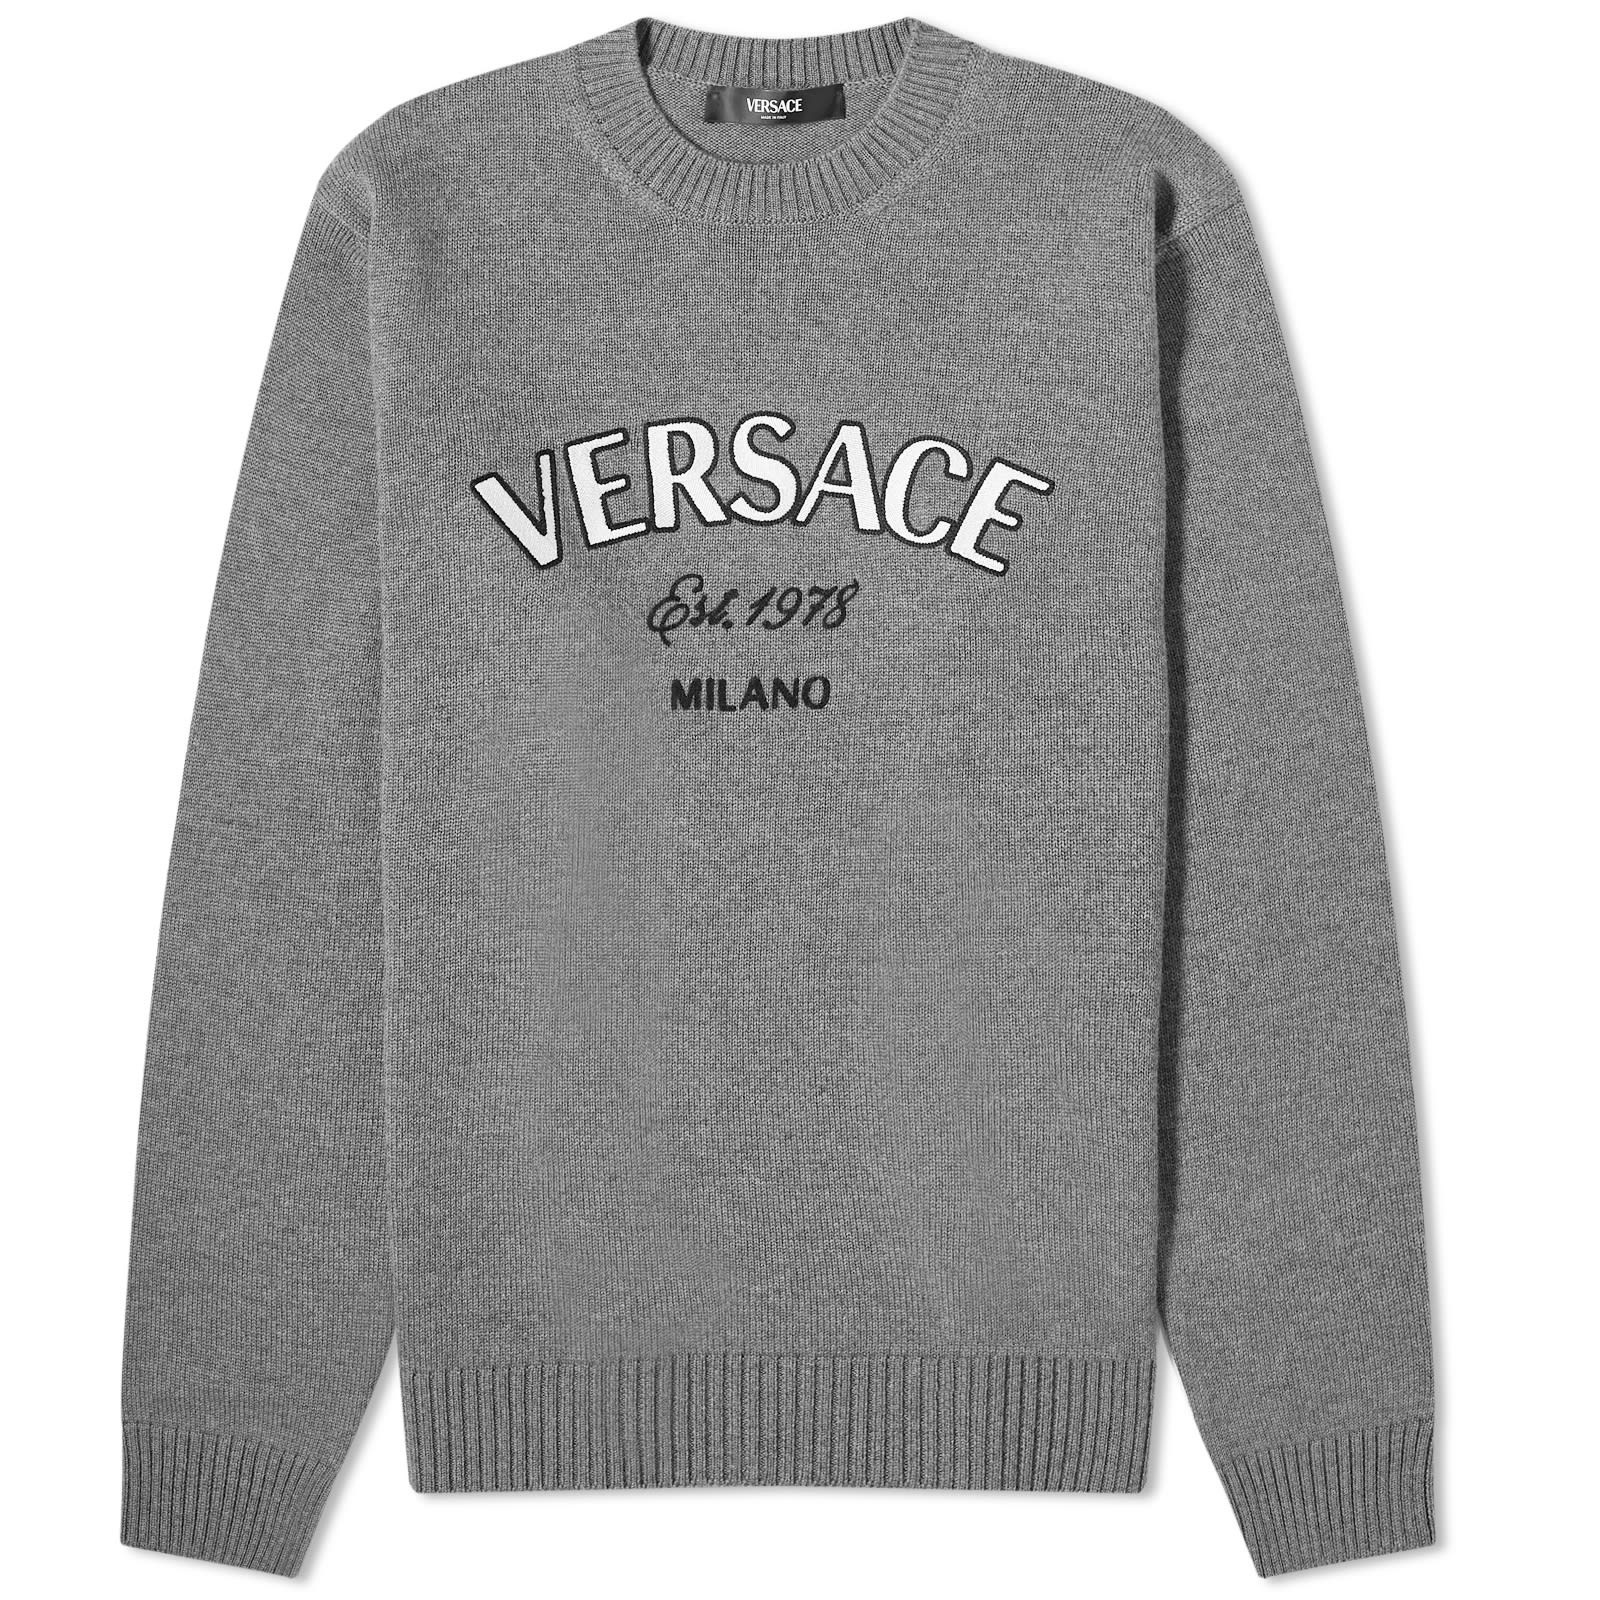 Versace Milano Embroidered Knit - 1